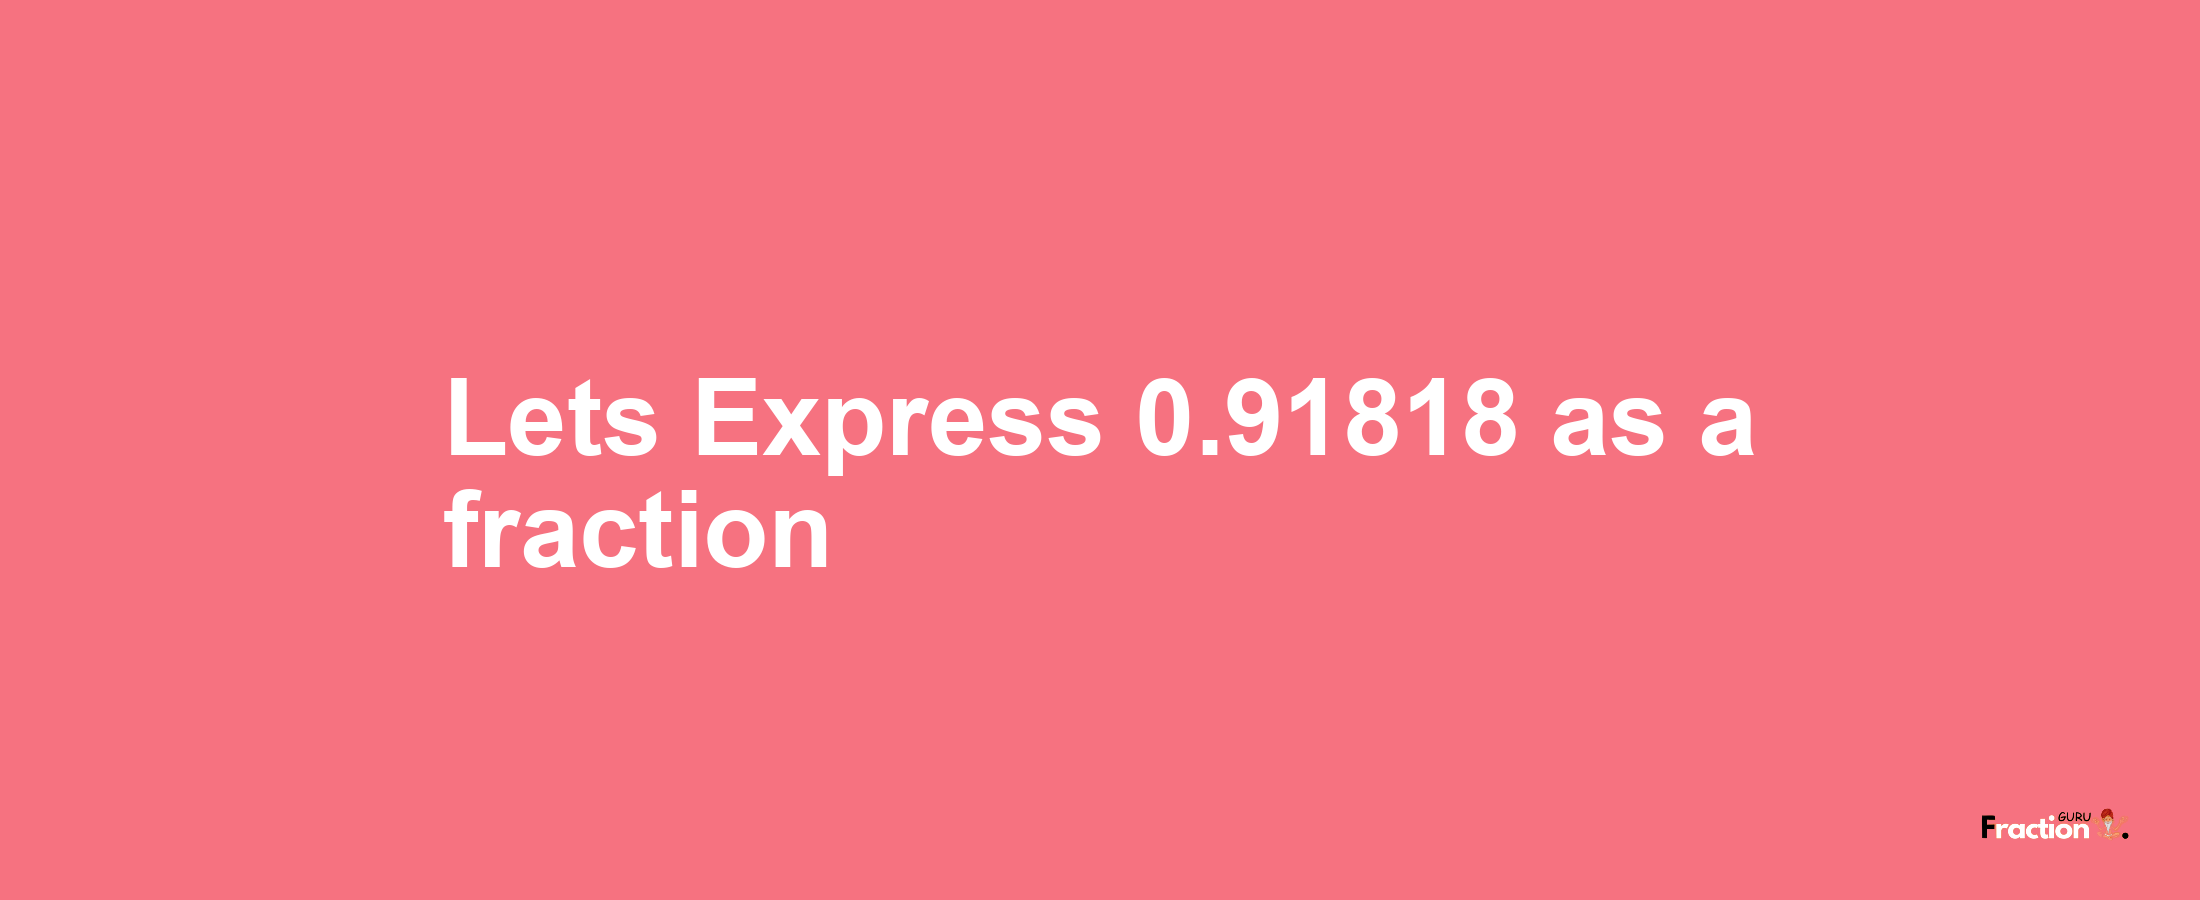 Lets Express 0.91818 as afraction